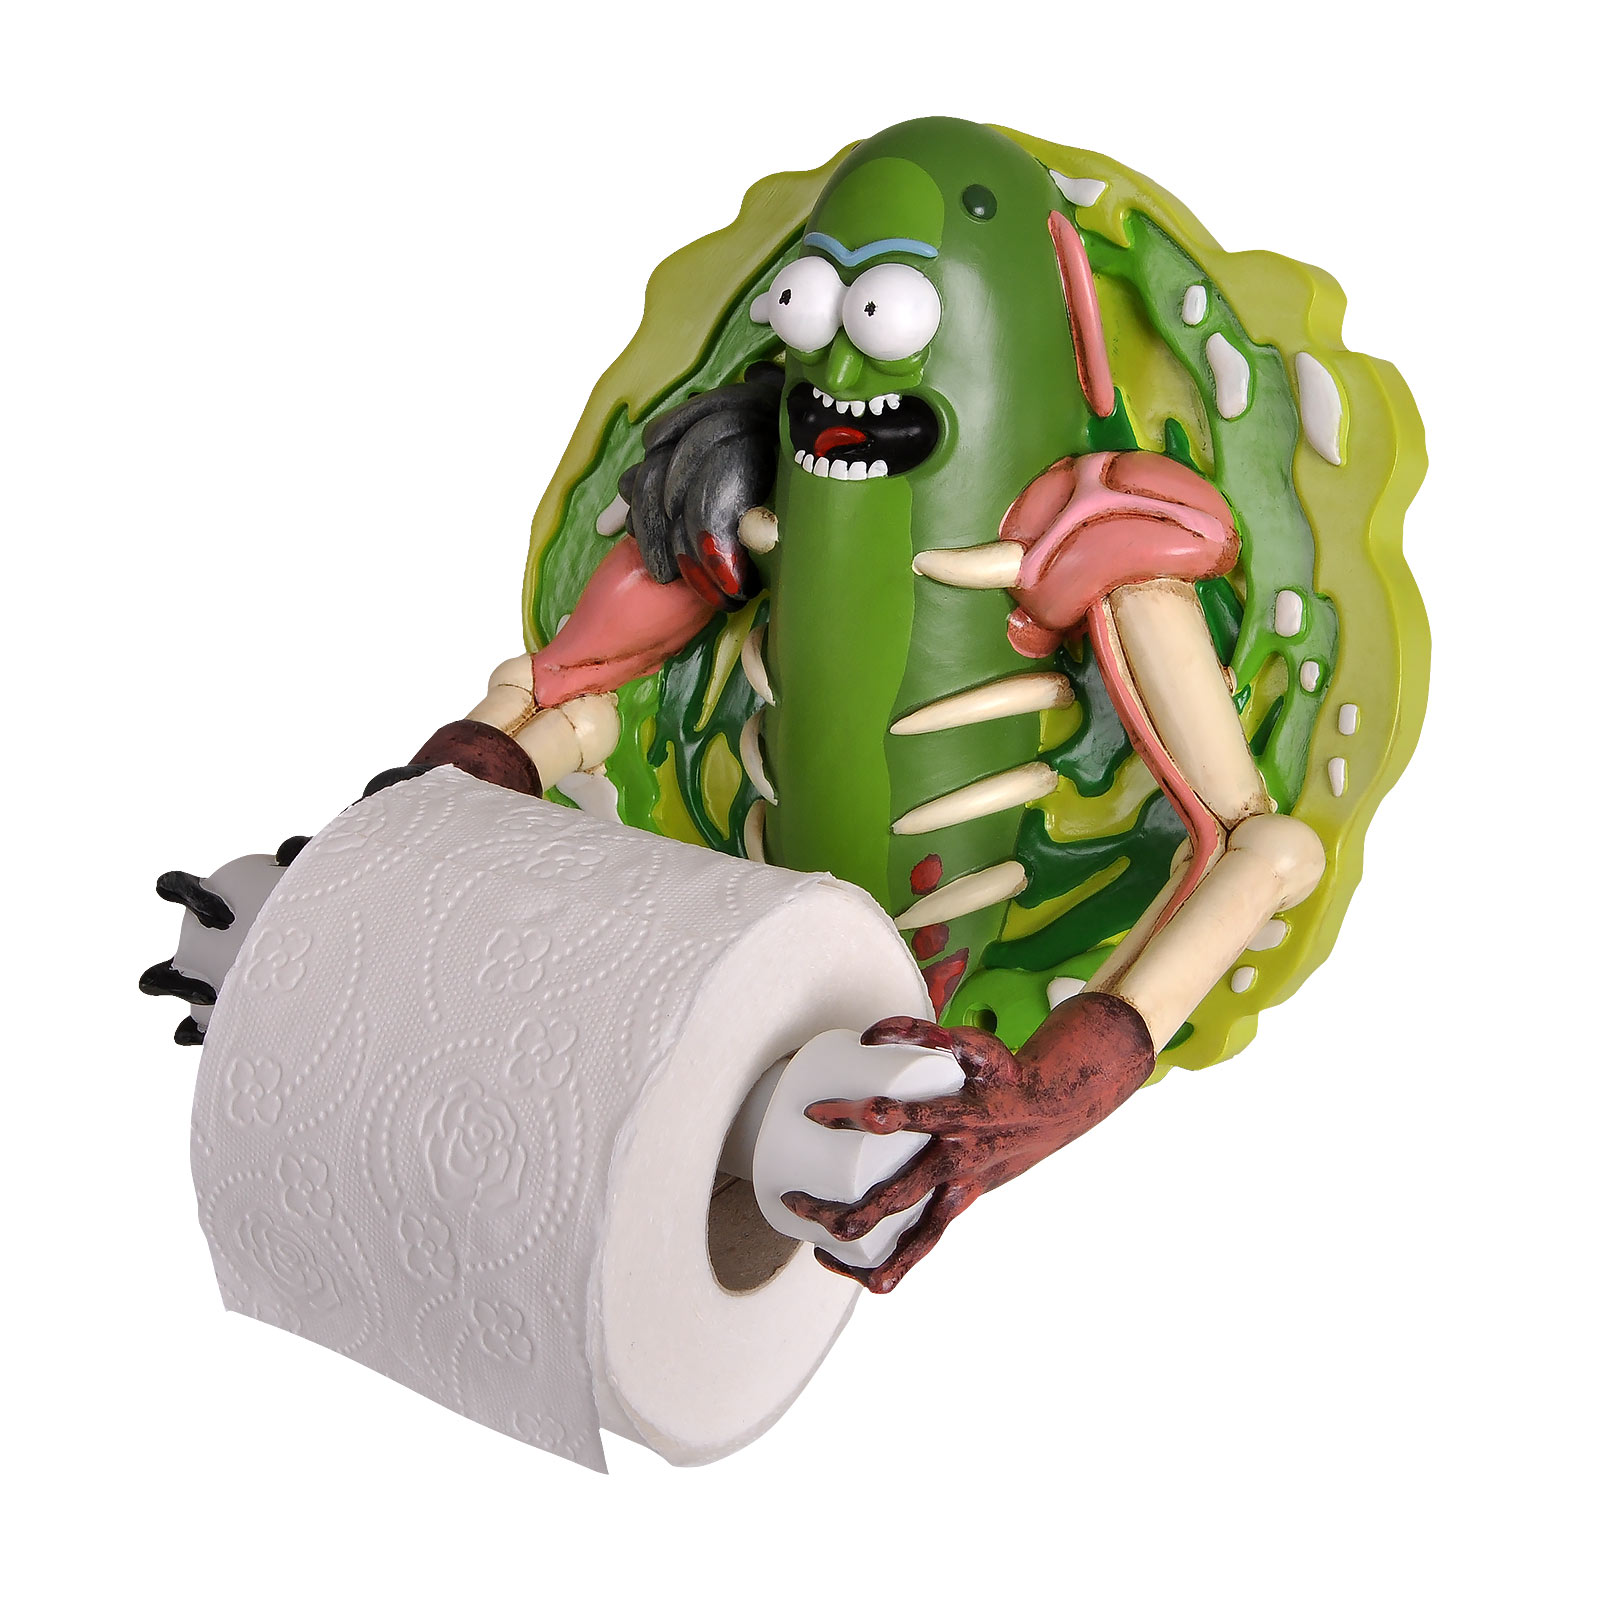 Rick and Morty - Pickle Rick Toilet Paper Holder